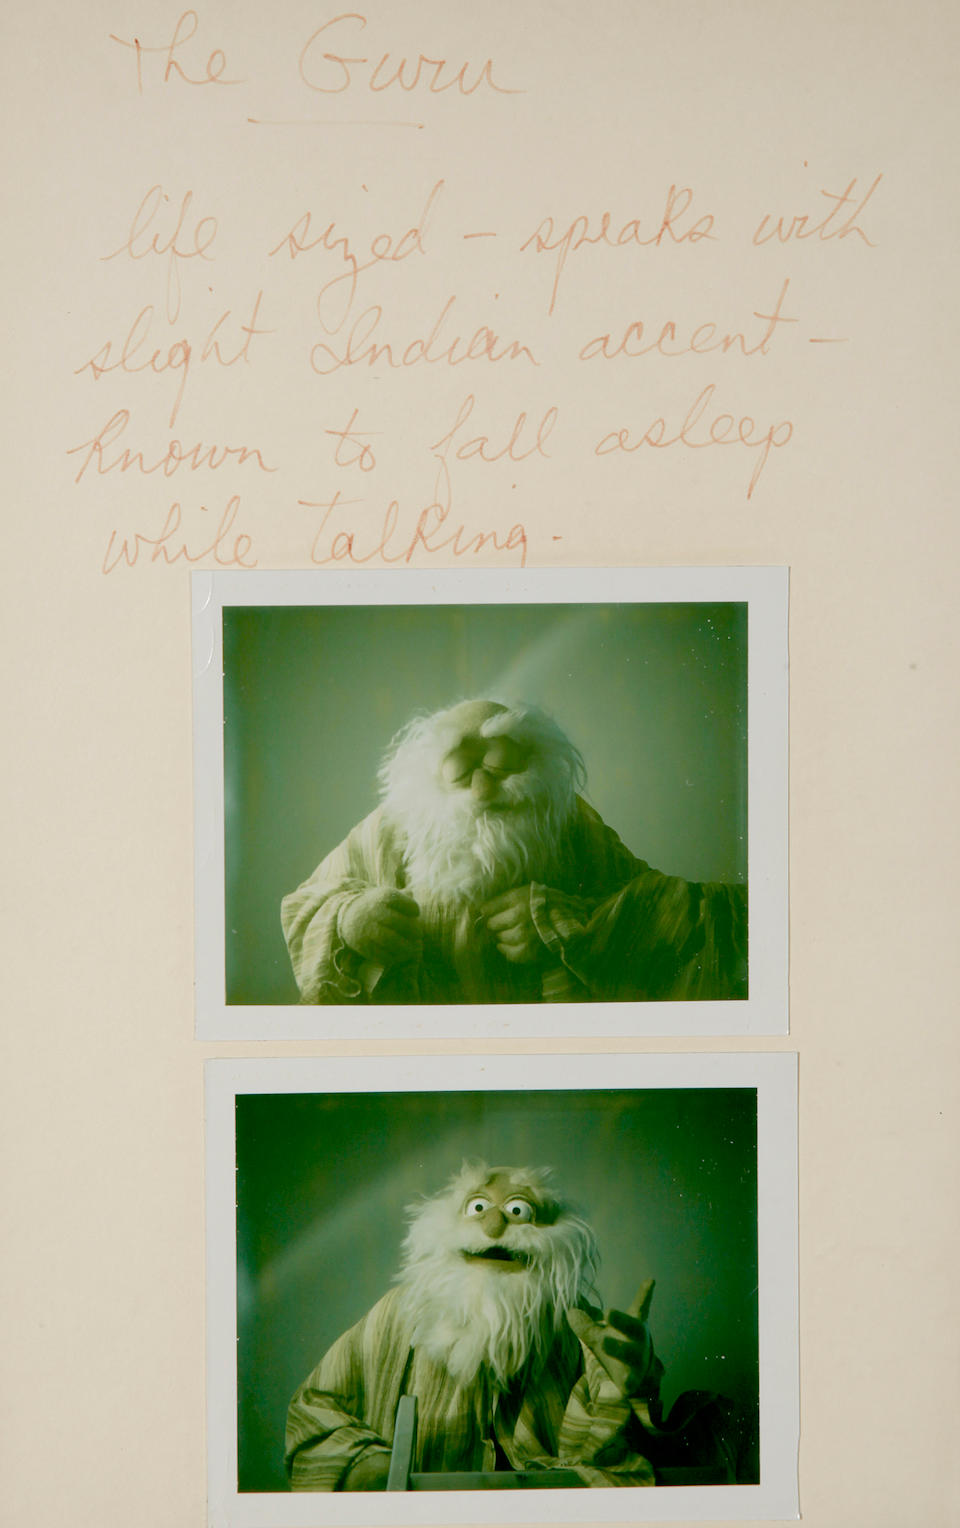 A collection of 9 sheets of Jim Henson character and story ideas for The Muppet Show